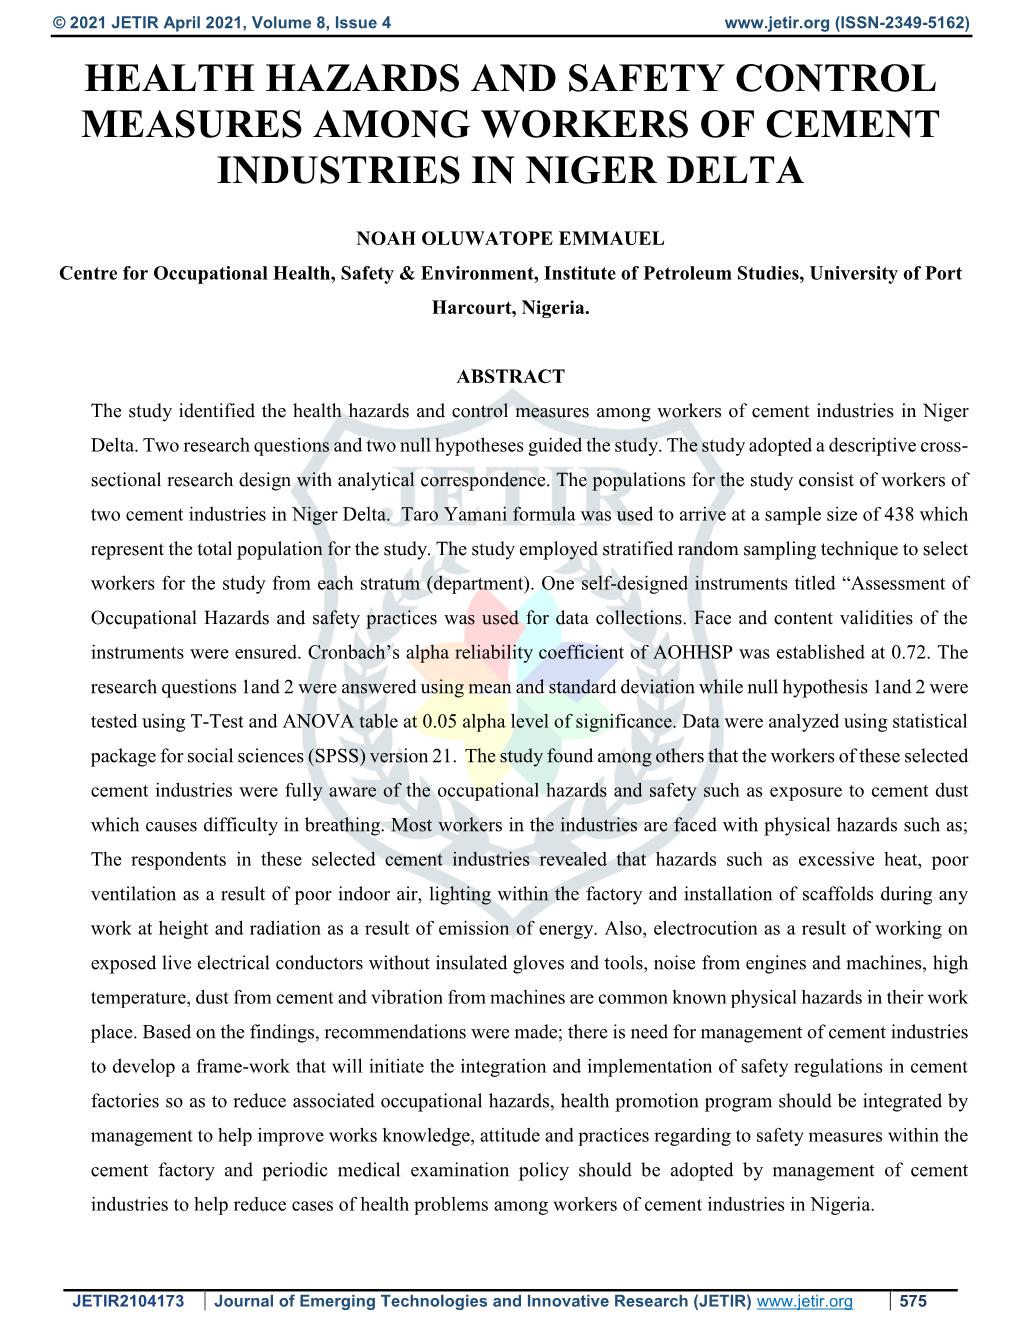 Health Hazards and Safety Control Measures Among Workers of Cement Industries in Niger Delta